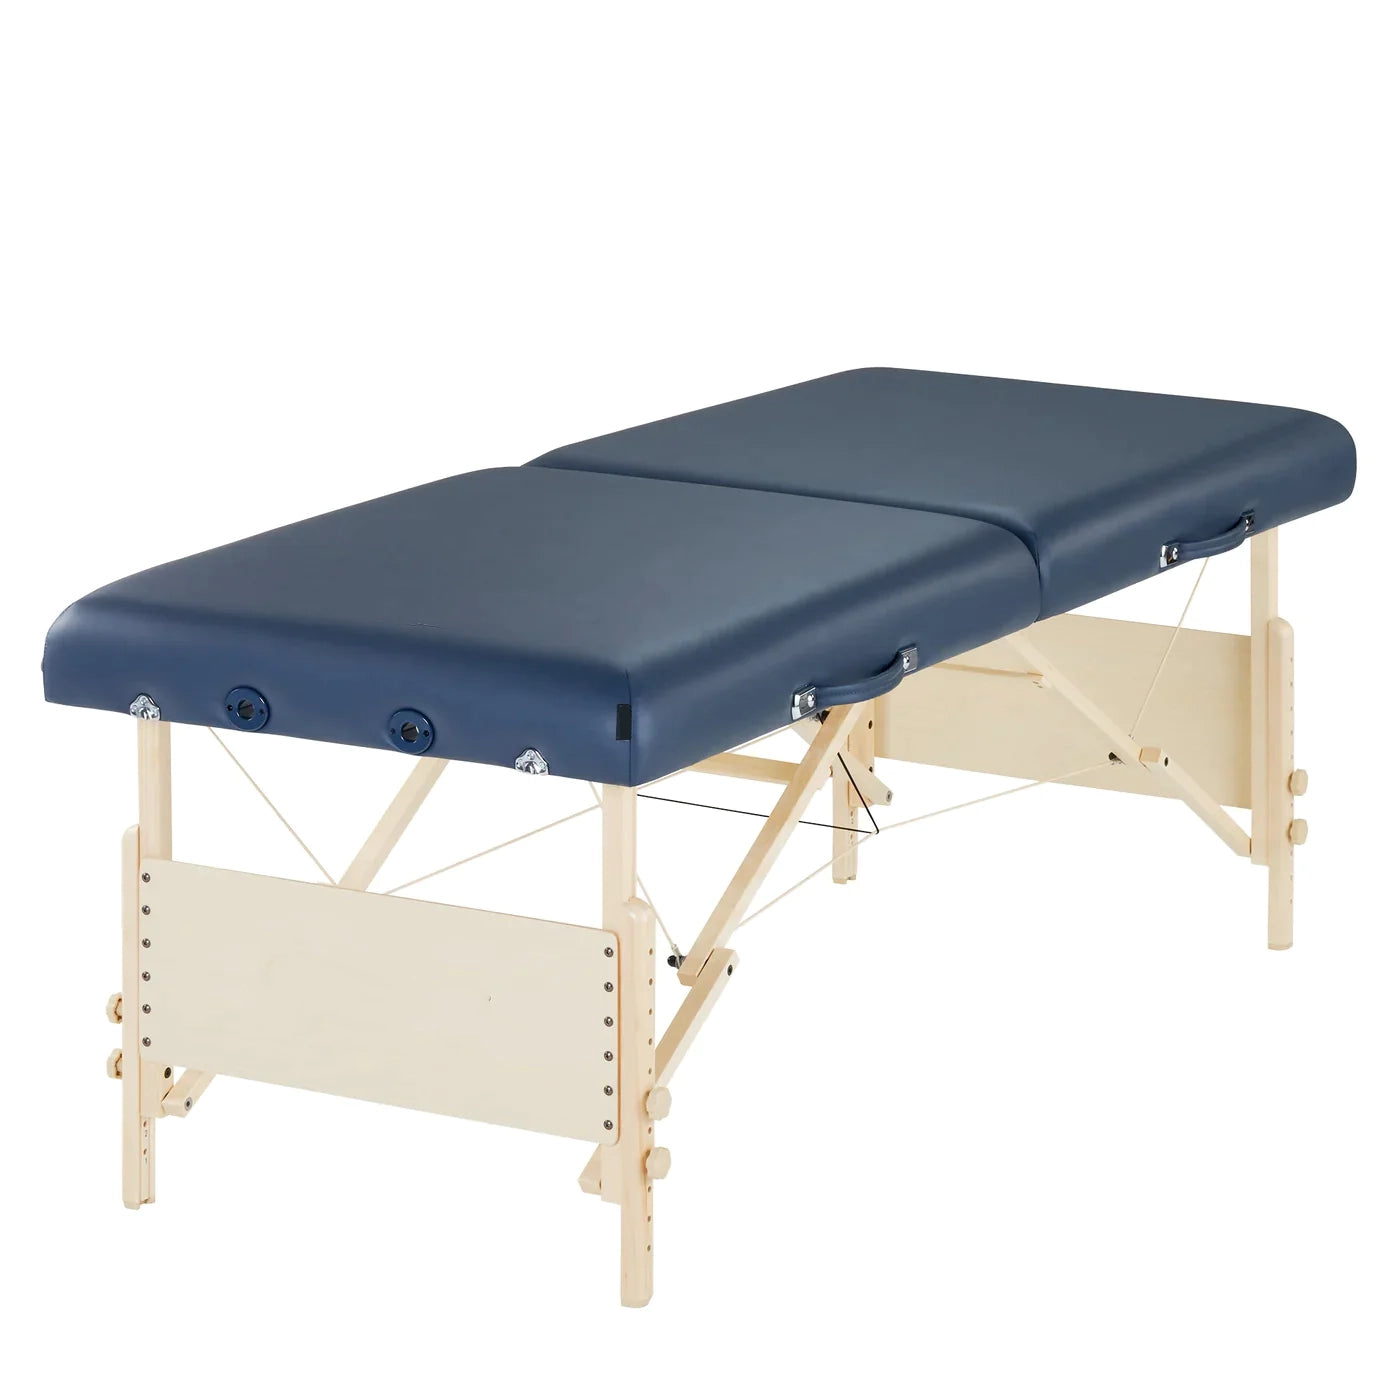 Bella2bello 30" CORONADO™ Portable Massage Table Package with Ambient Light System